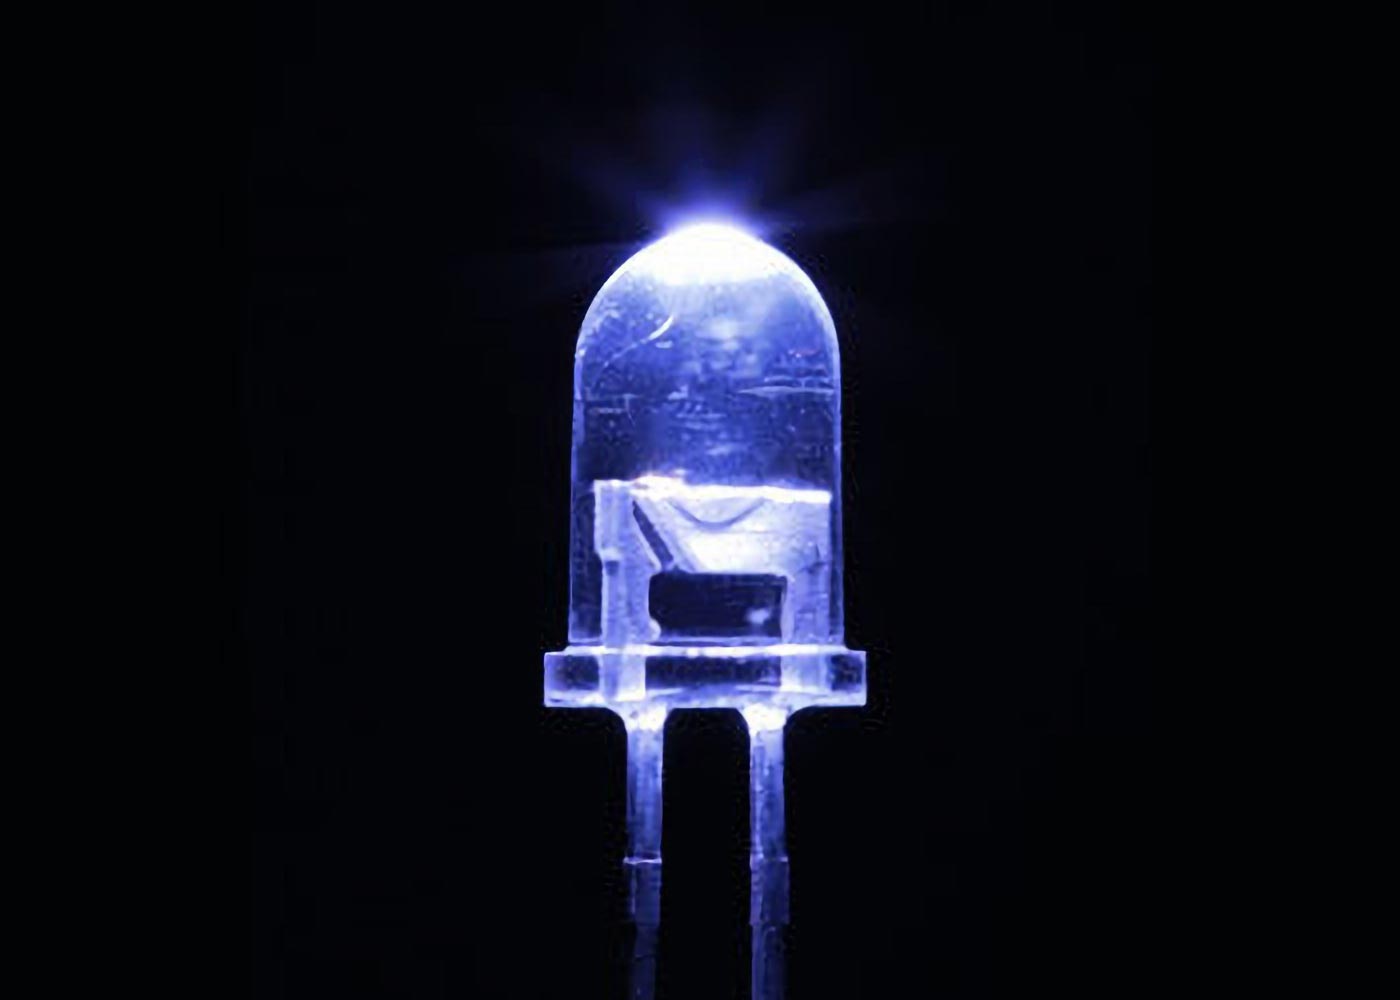 Far UV LED lights efficiently kill bacteria and viruses without harming people